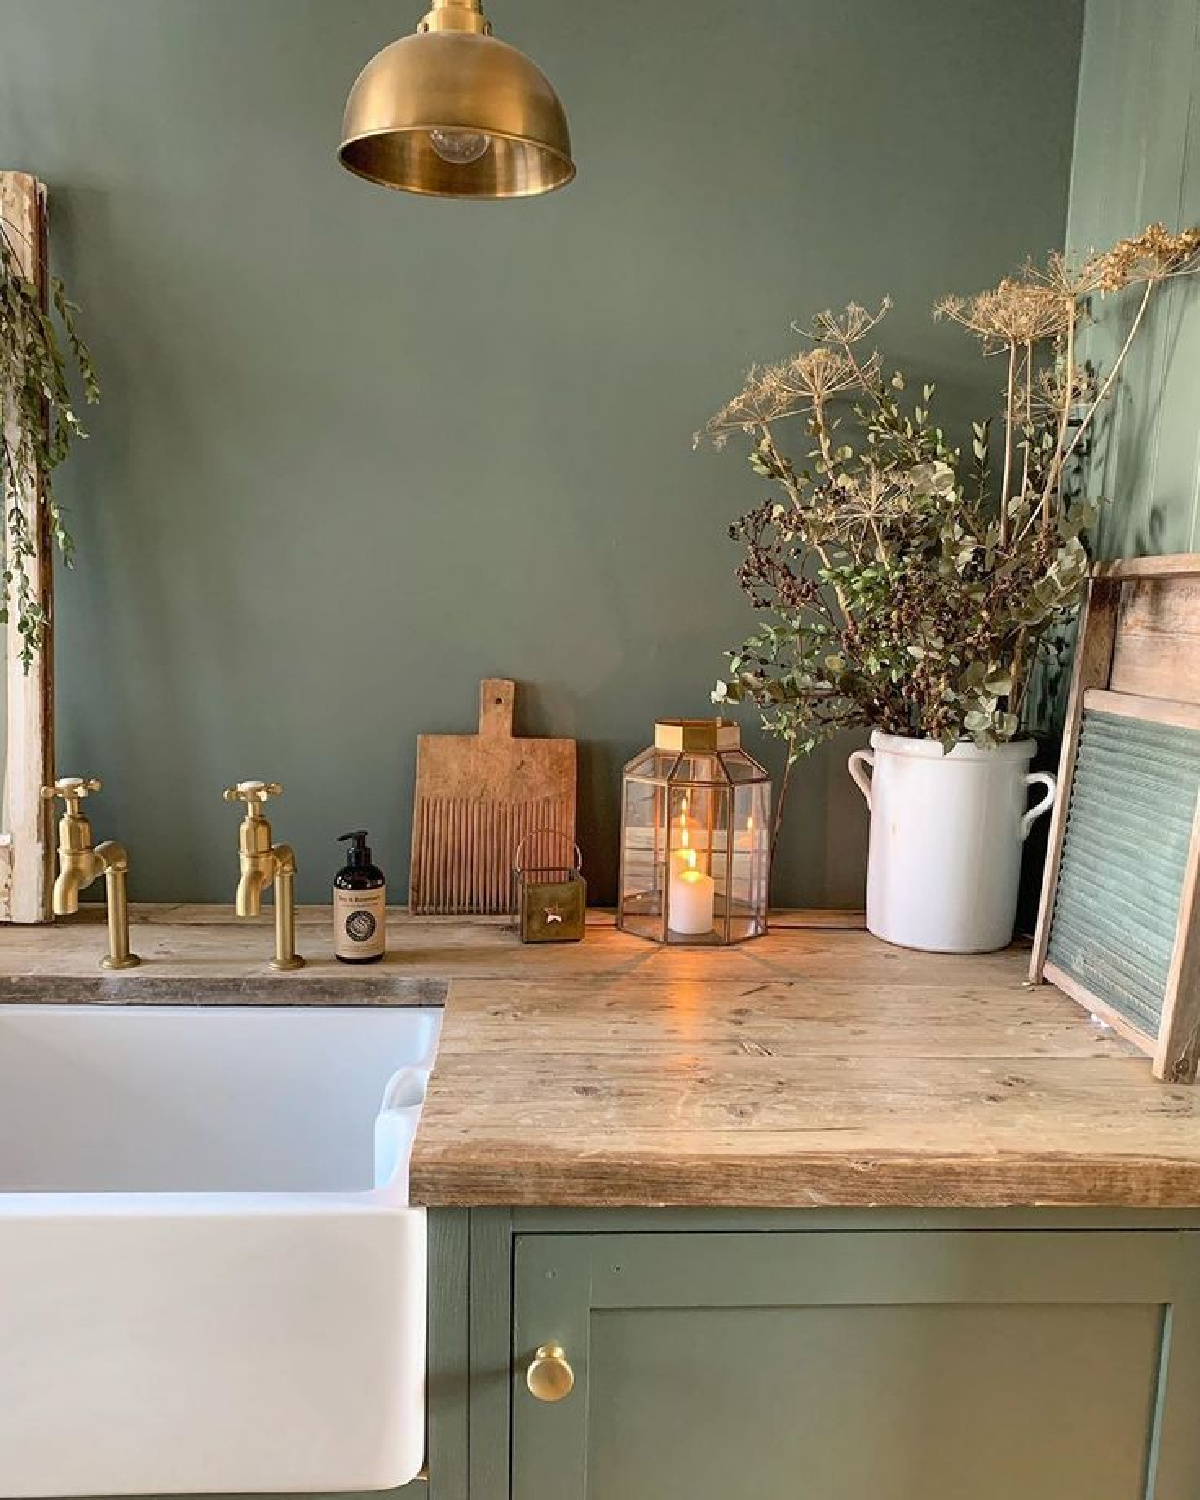 Green Smoke (Farrow & Ball) painted wall and cabinets in laundry room = Simply Scandi Katie. #laundryrooms #greensmoke